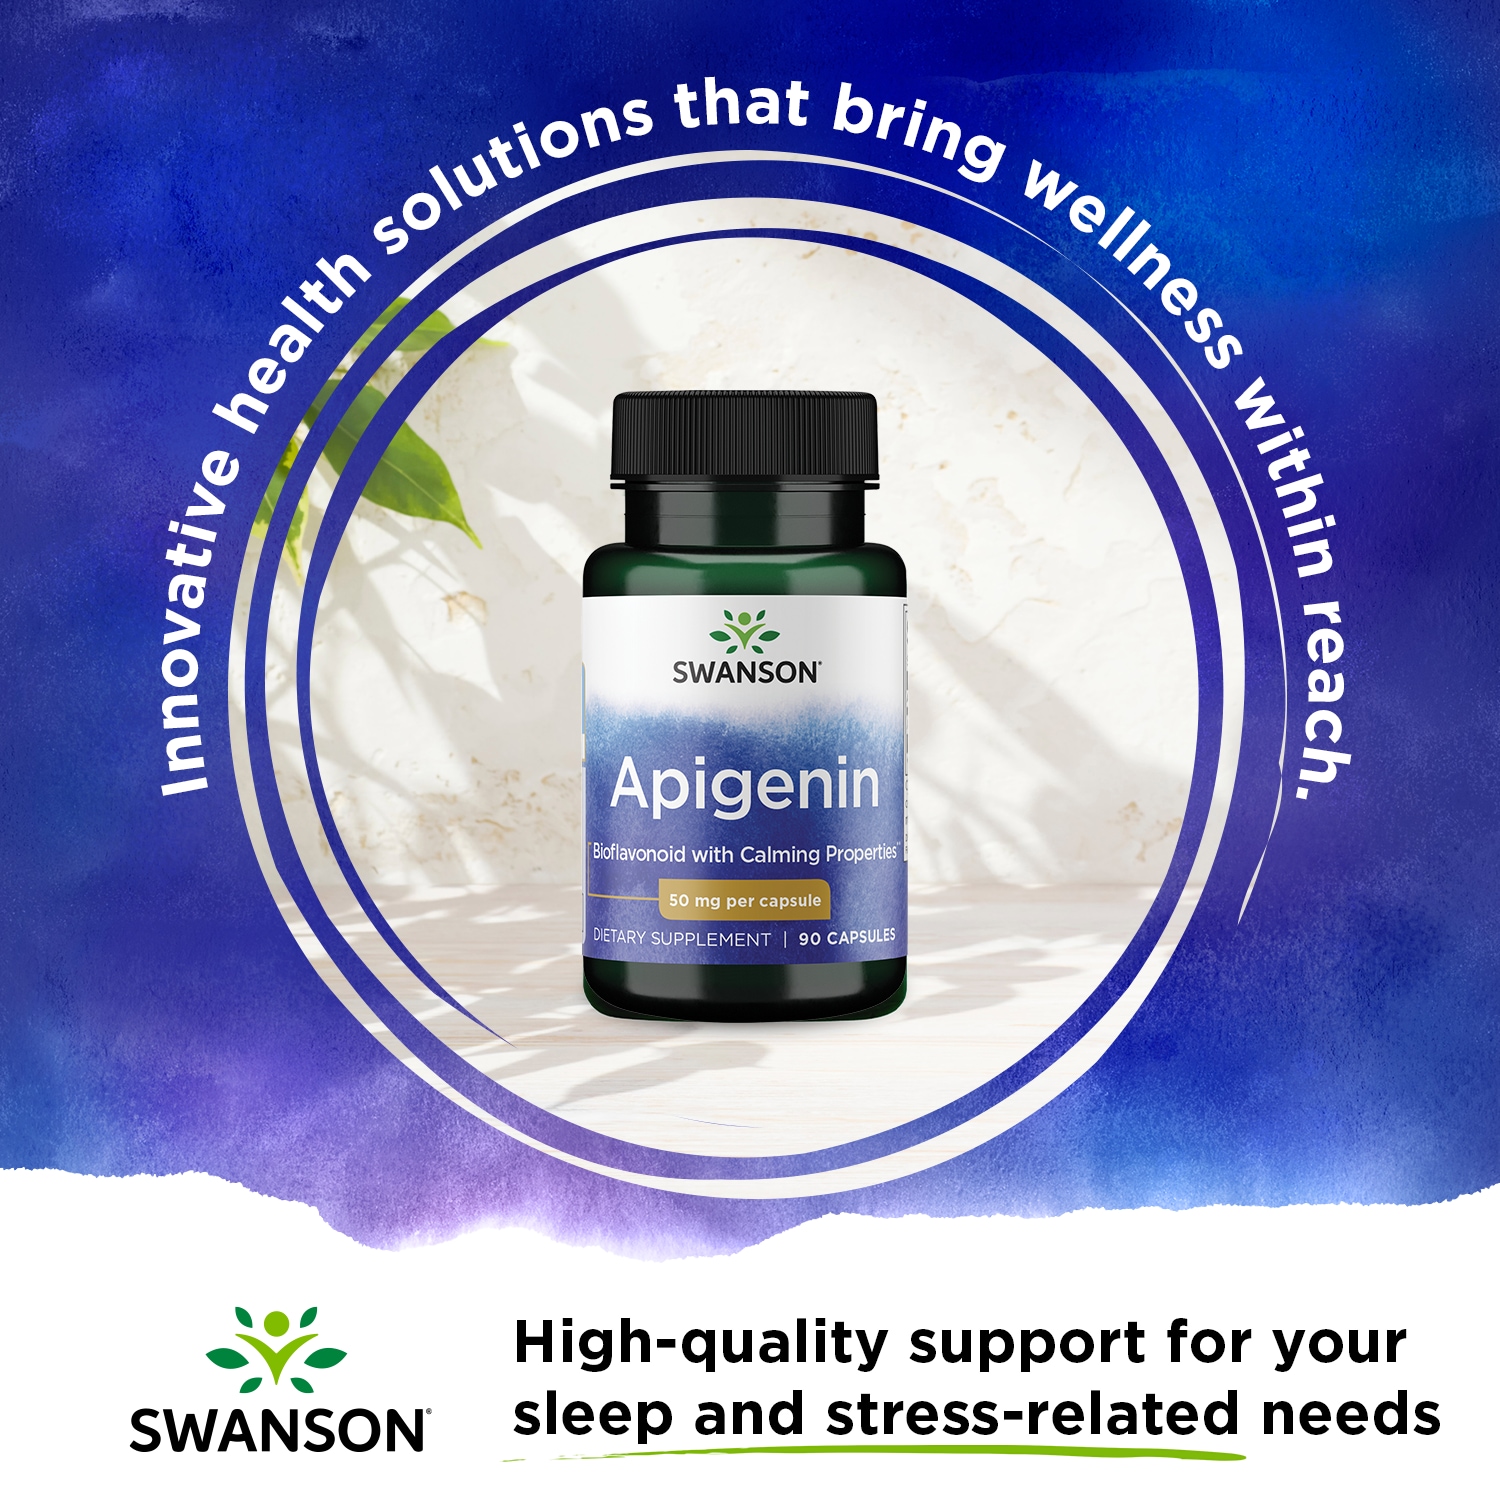 Swanson Apigenin - Natural Supplement Promoting Prostate Health - Bioflavonoid Supplement Supporting Glucose Metabolism & Nervous System Health - (90 Capsules, 50mg Each) - image 2 of 5